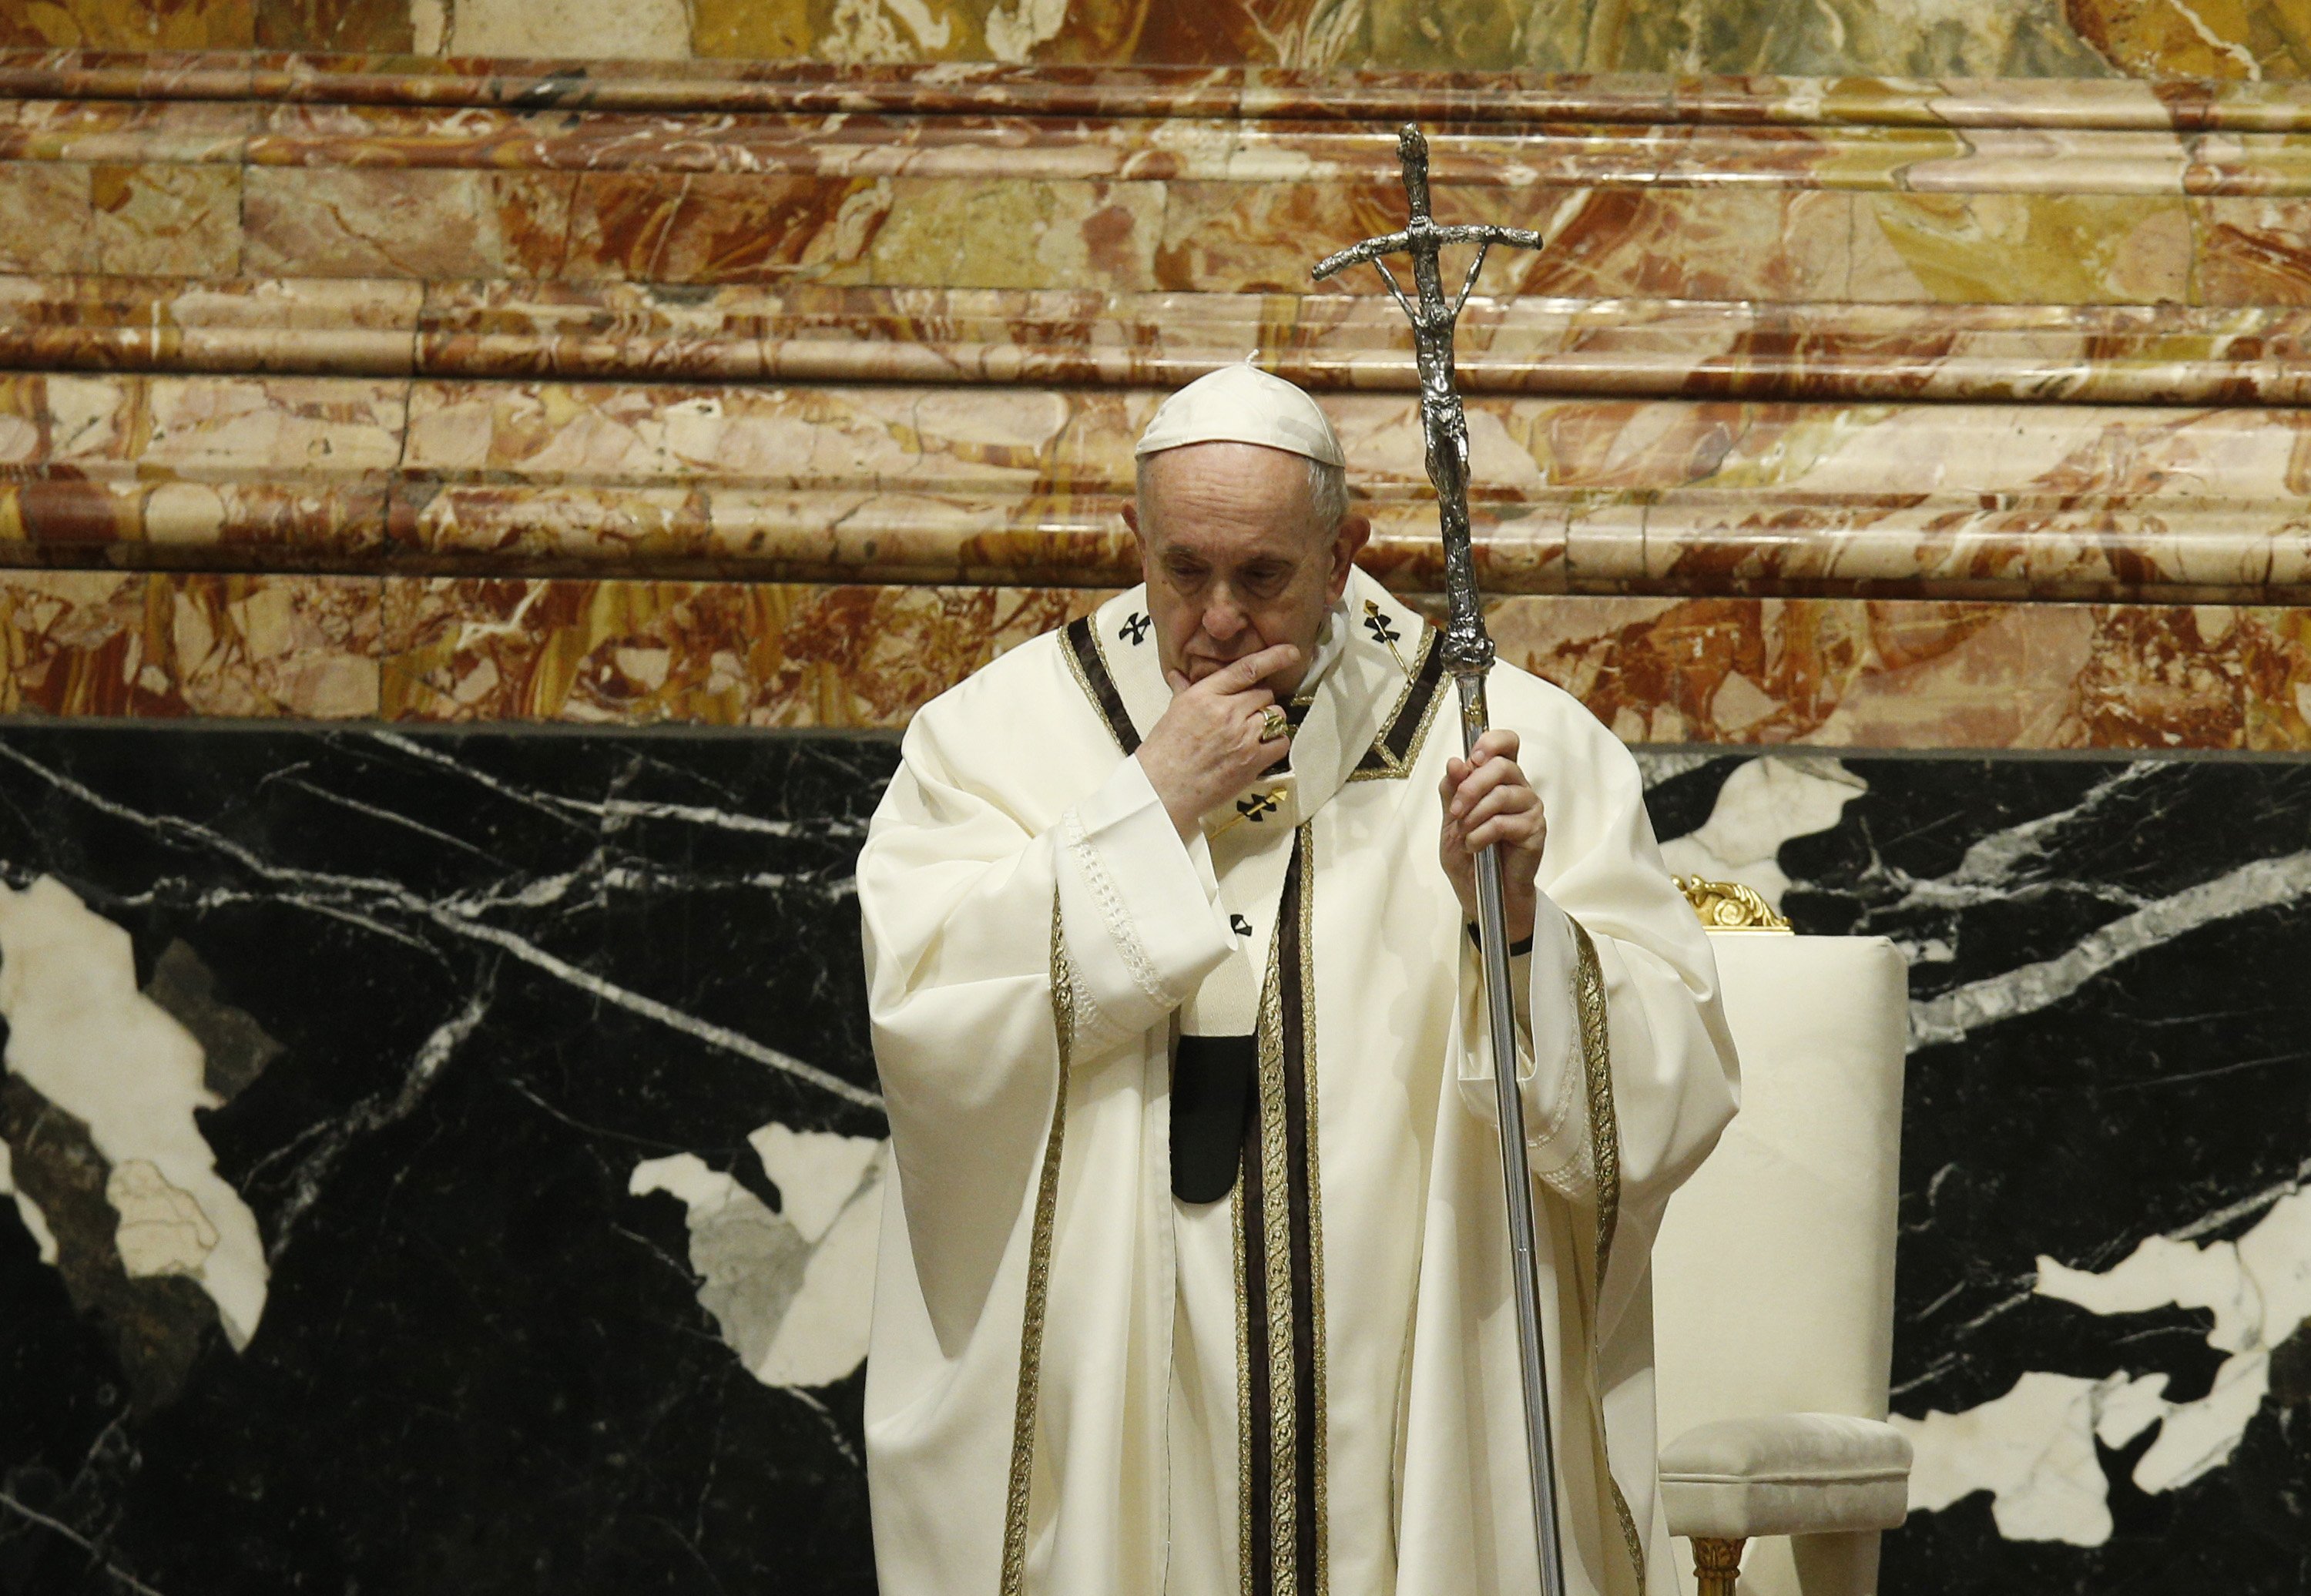 Pope Francis Epiphany Homily The Magi Teach Us That Worshiping Jesus